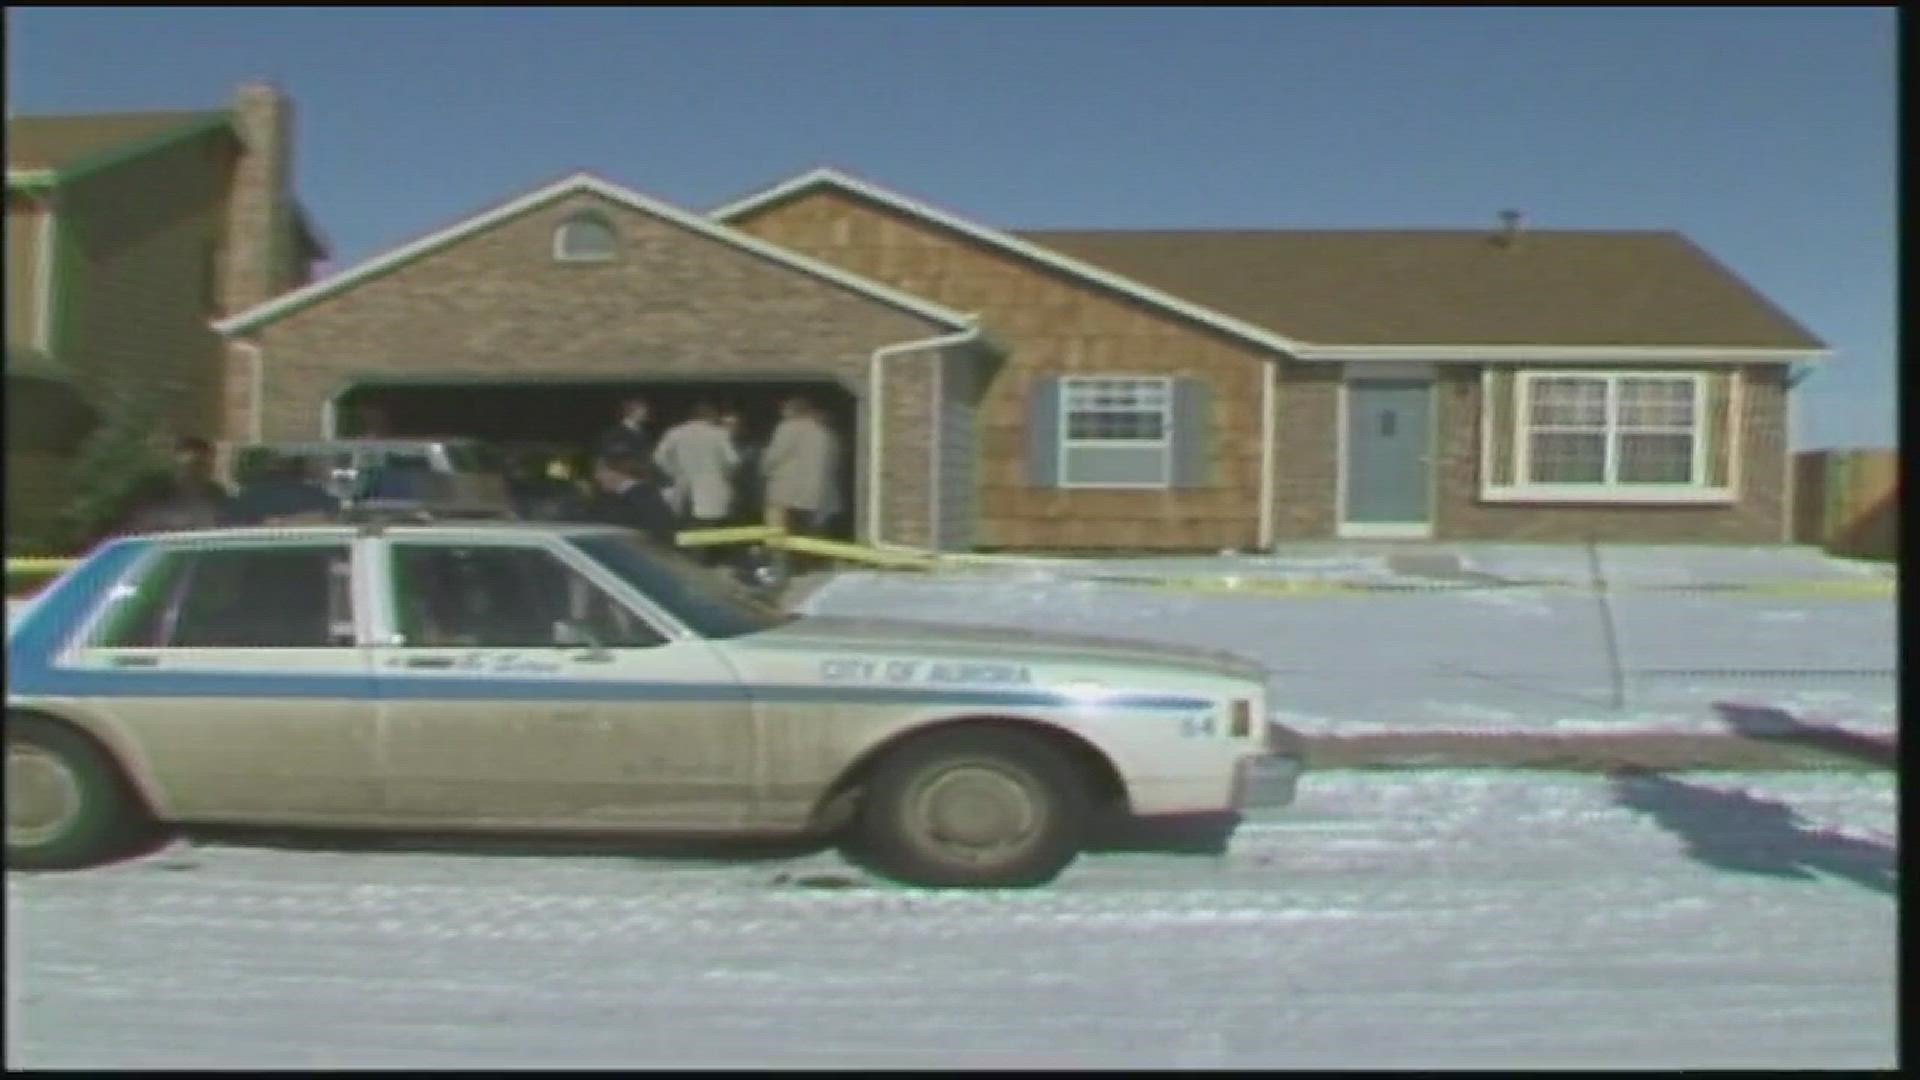 In January 1984, Bruce and Debra Bennett and their daughter, Melissa, were killed in a shocking attack that other 3-year-old Vanessa survived. Here is the original 9NEWS report about the attacks.